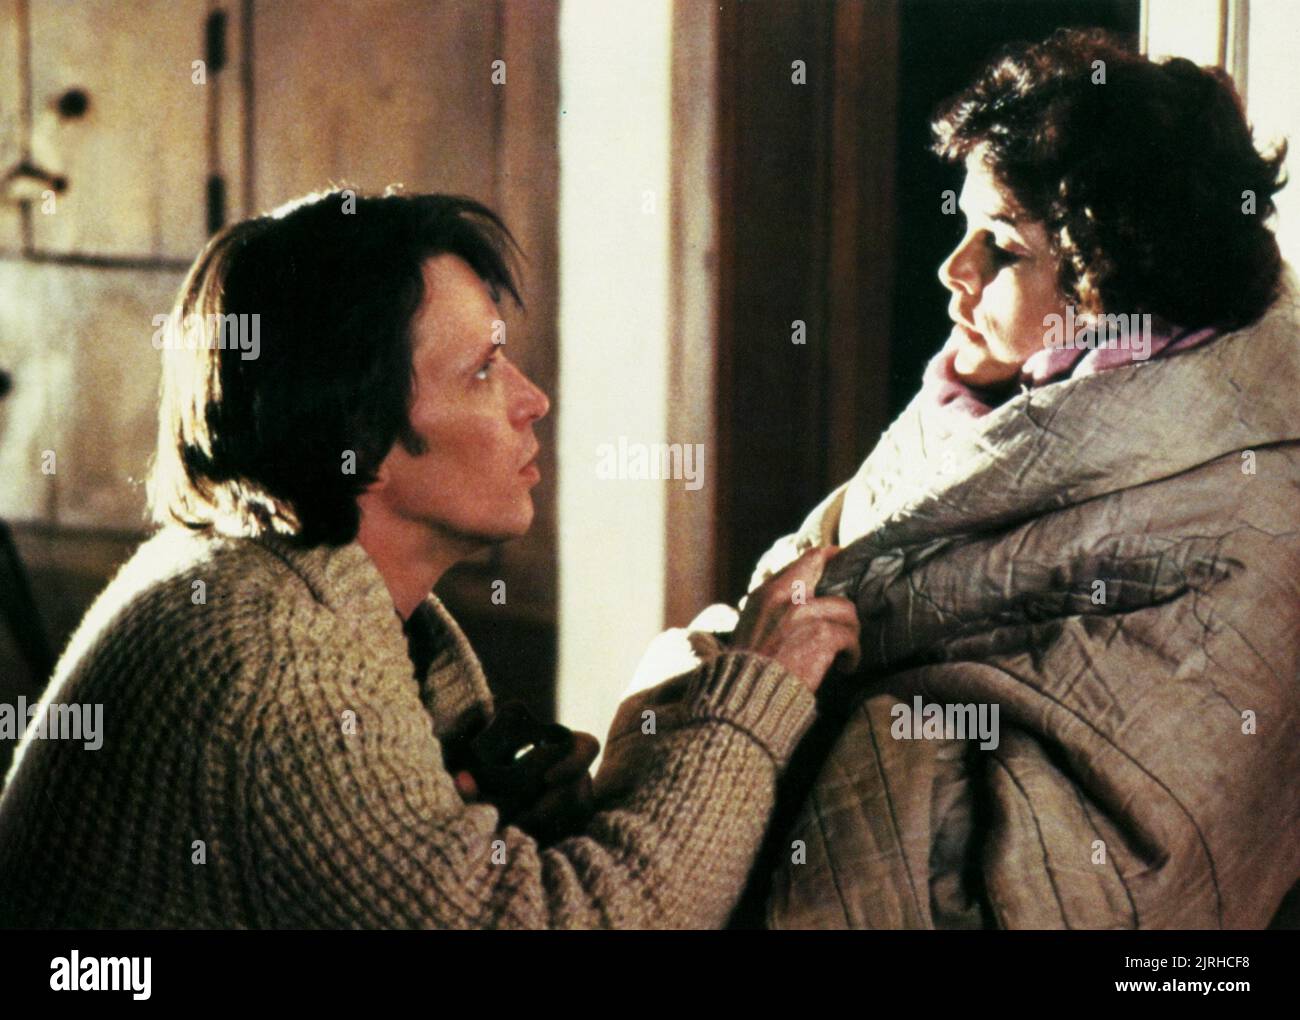 PETER WELLER, ALI MACGRAW, JUST TELL ME WHAT YOU WANT, 1980 Stock Photo